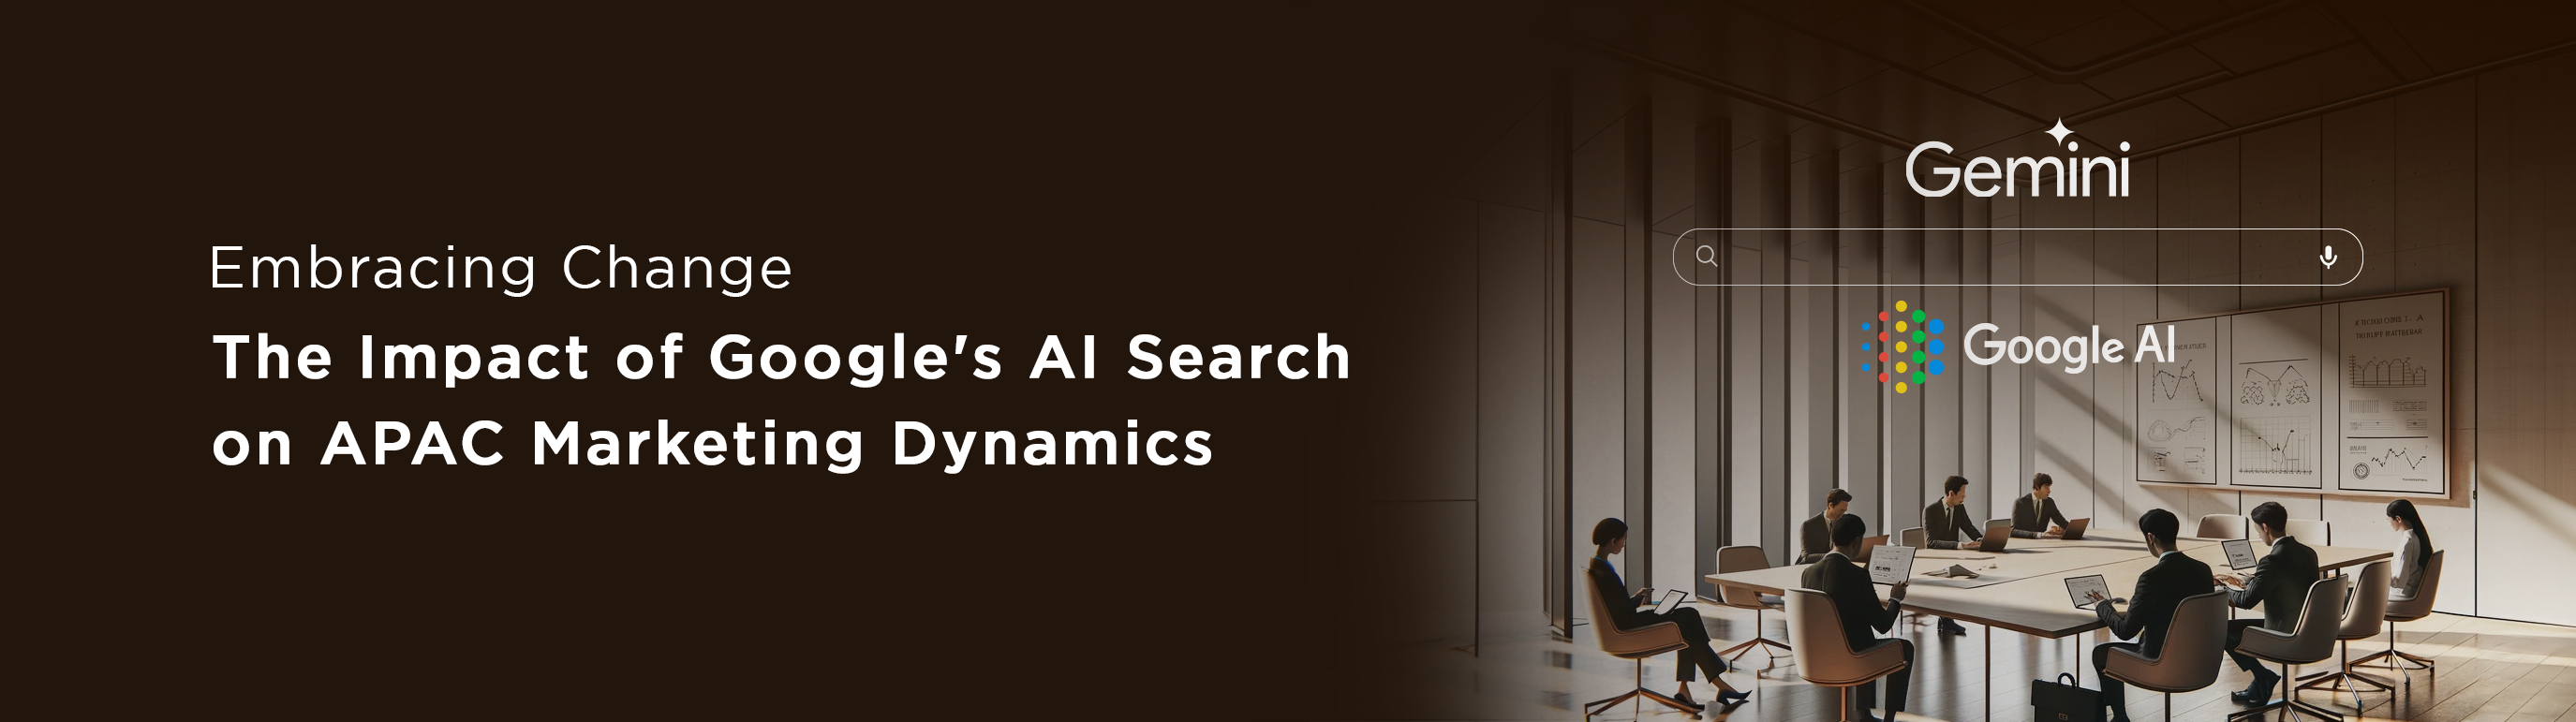 Embracing Change:The Impact of Google’s AI Search on APAC Marketing Dynamics